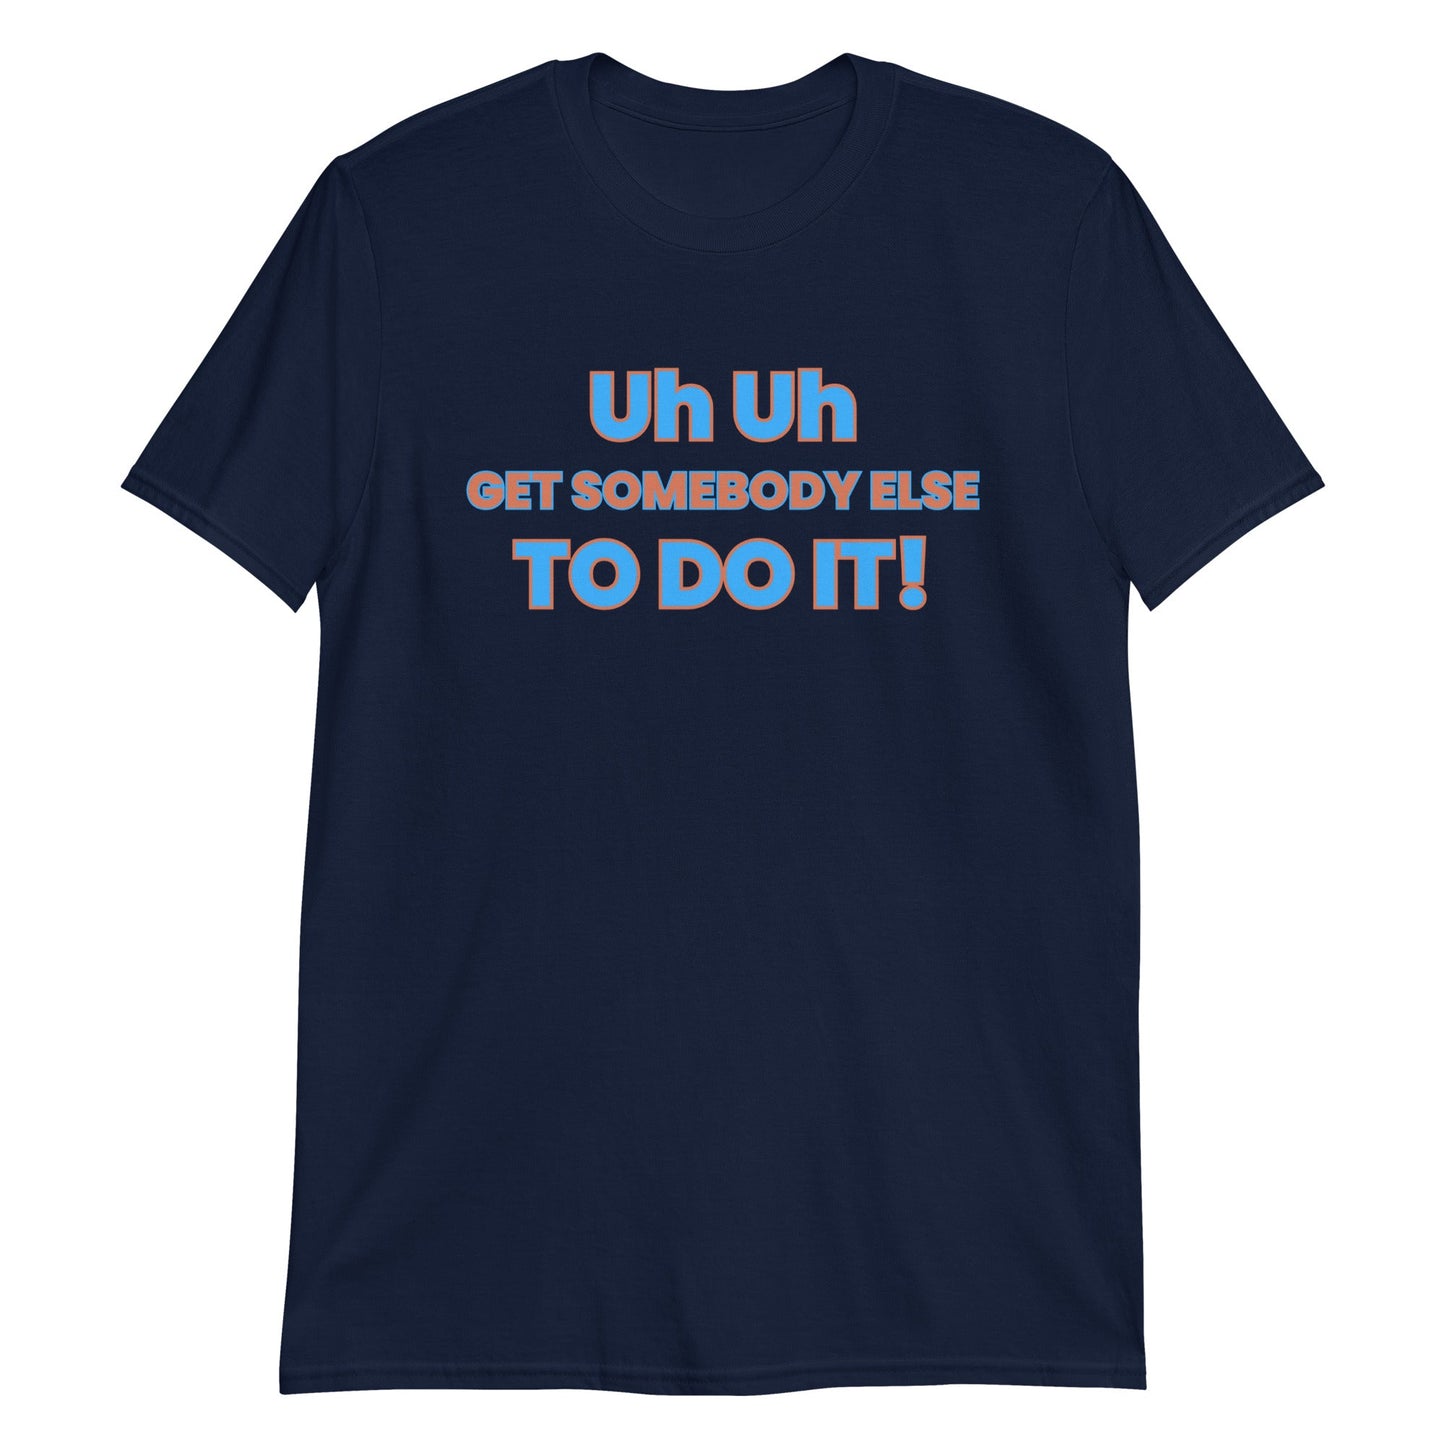 Uh Uh Get Somebody Else To Do It! Short-Sleeve Unisex T-Shirt (For a Slim Fit Order A Size Down) - Catch This Tea Shirts